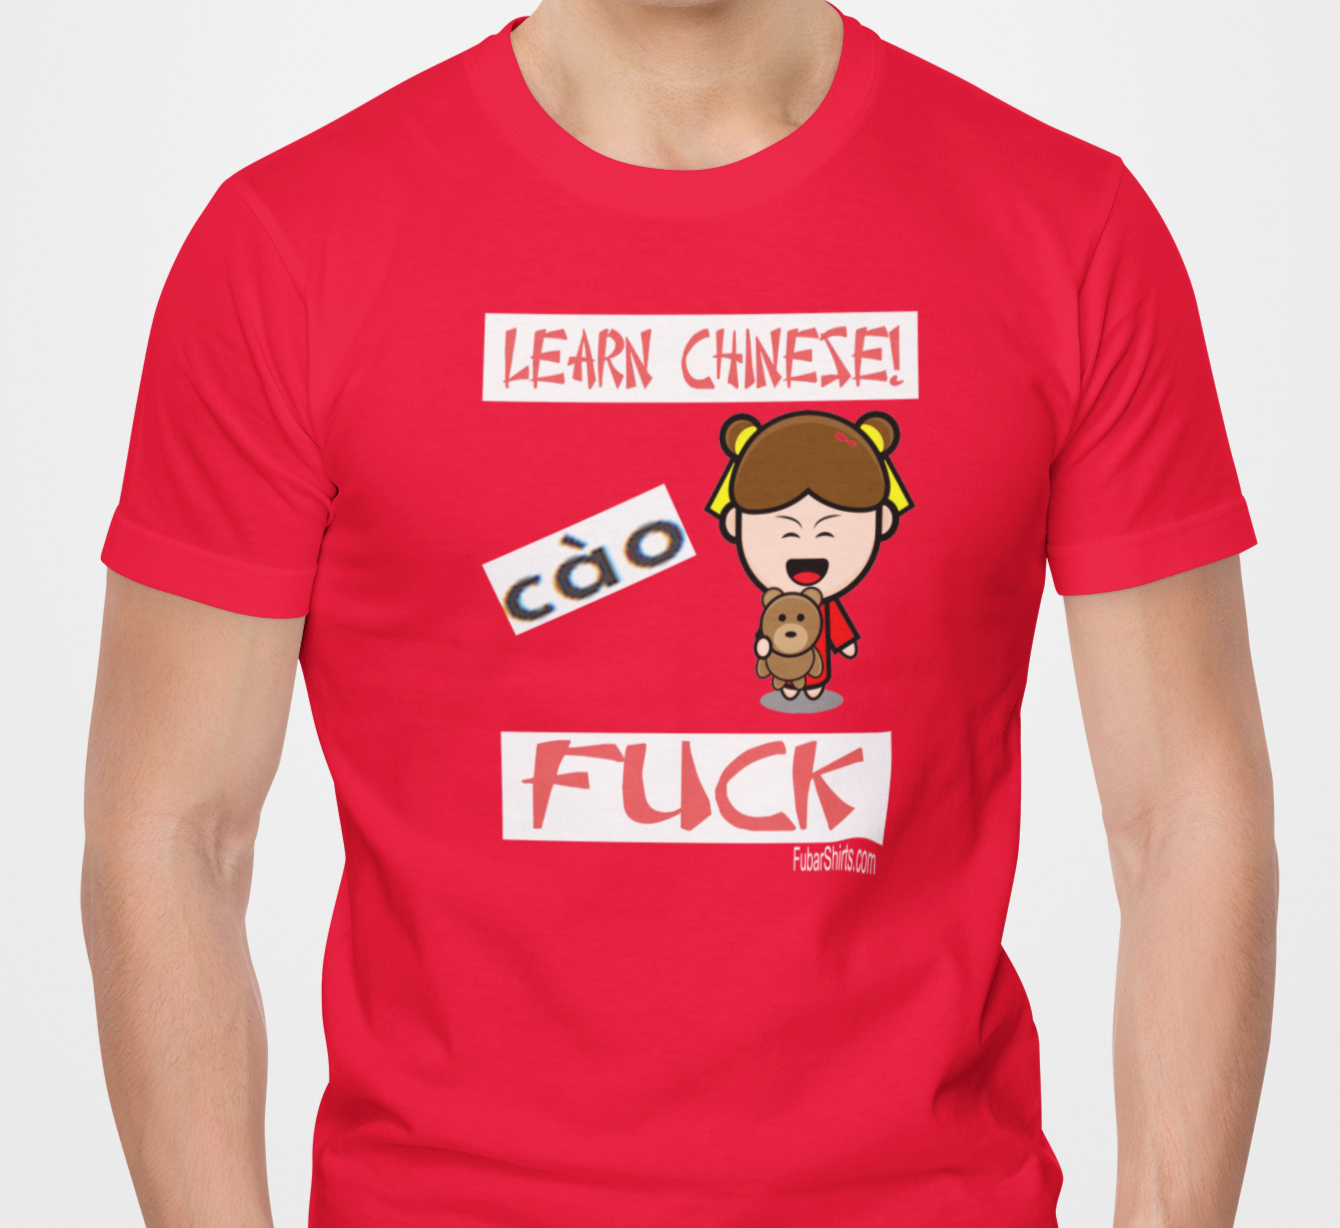 learn chinese - fuck t-shirt by fubarshirts.com. red tee.